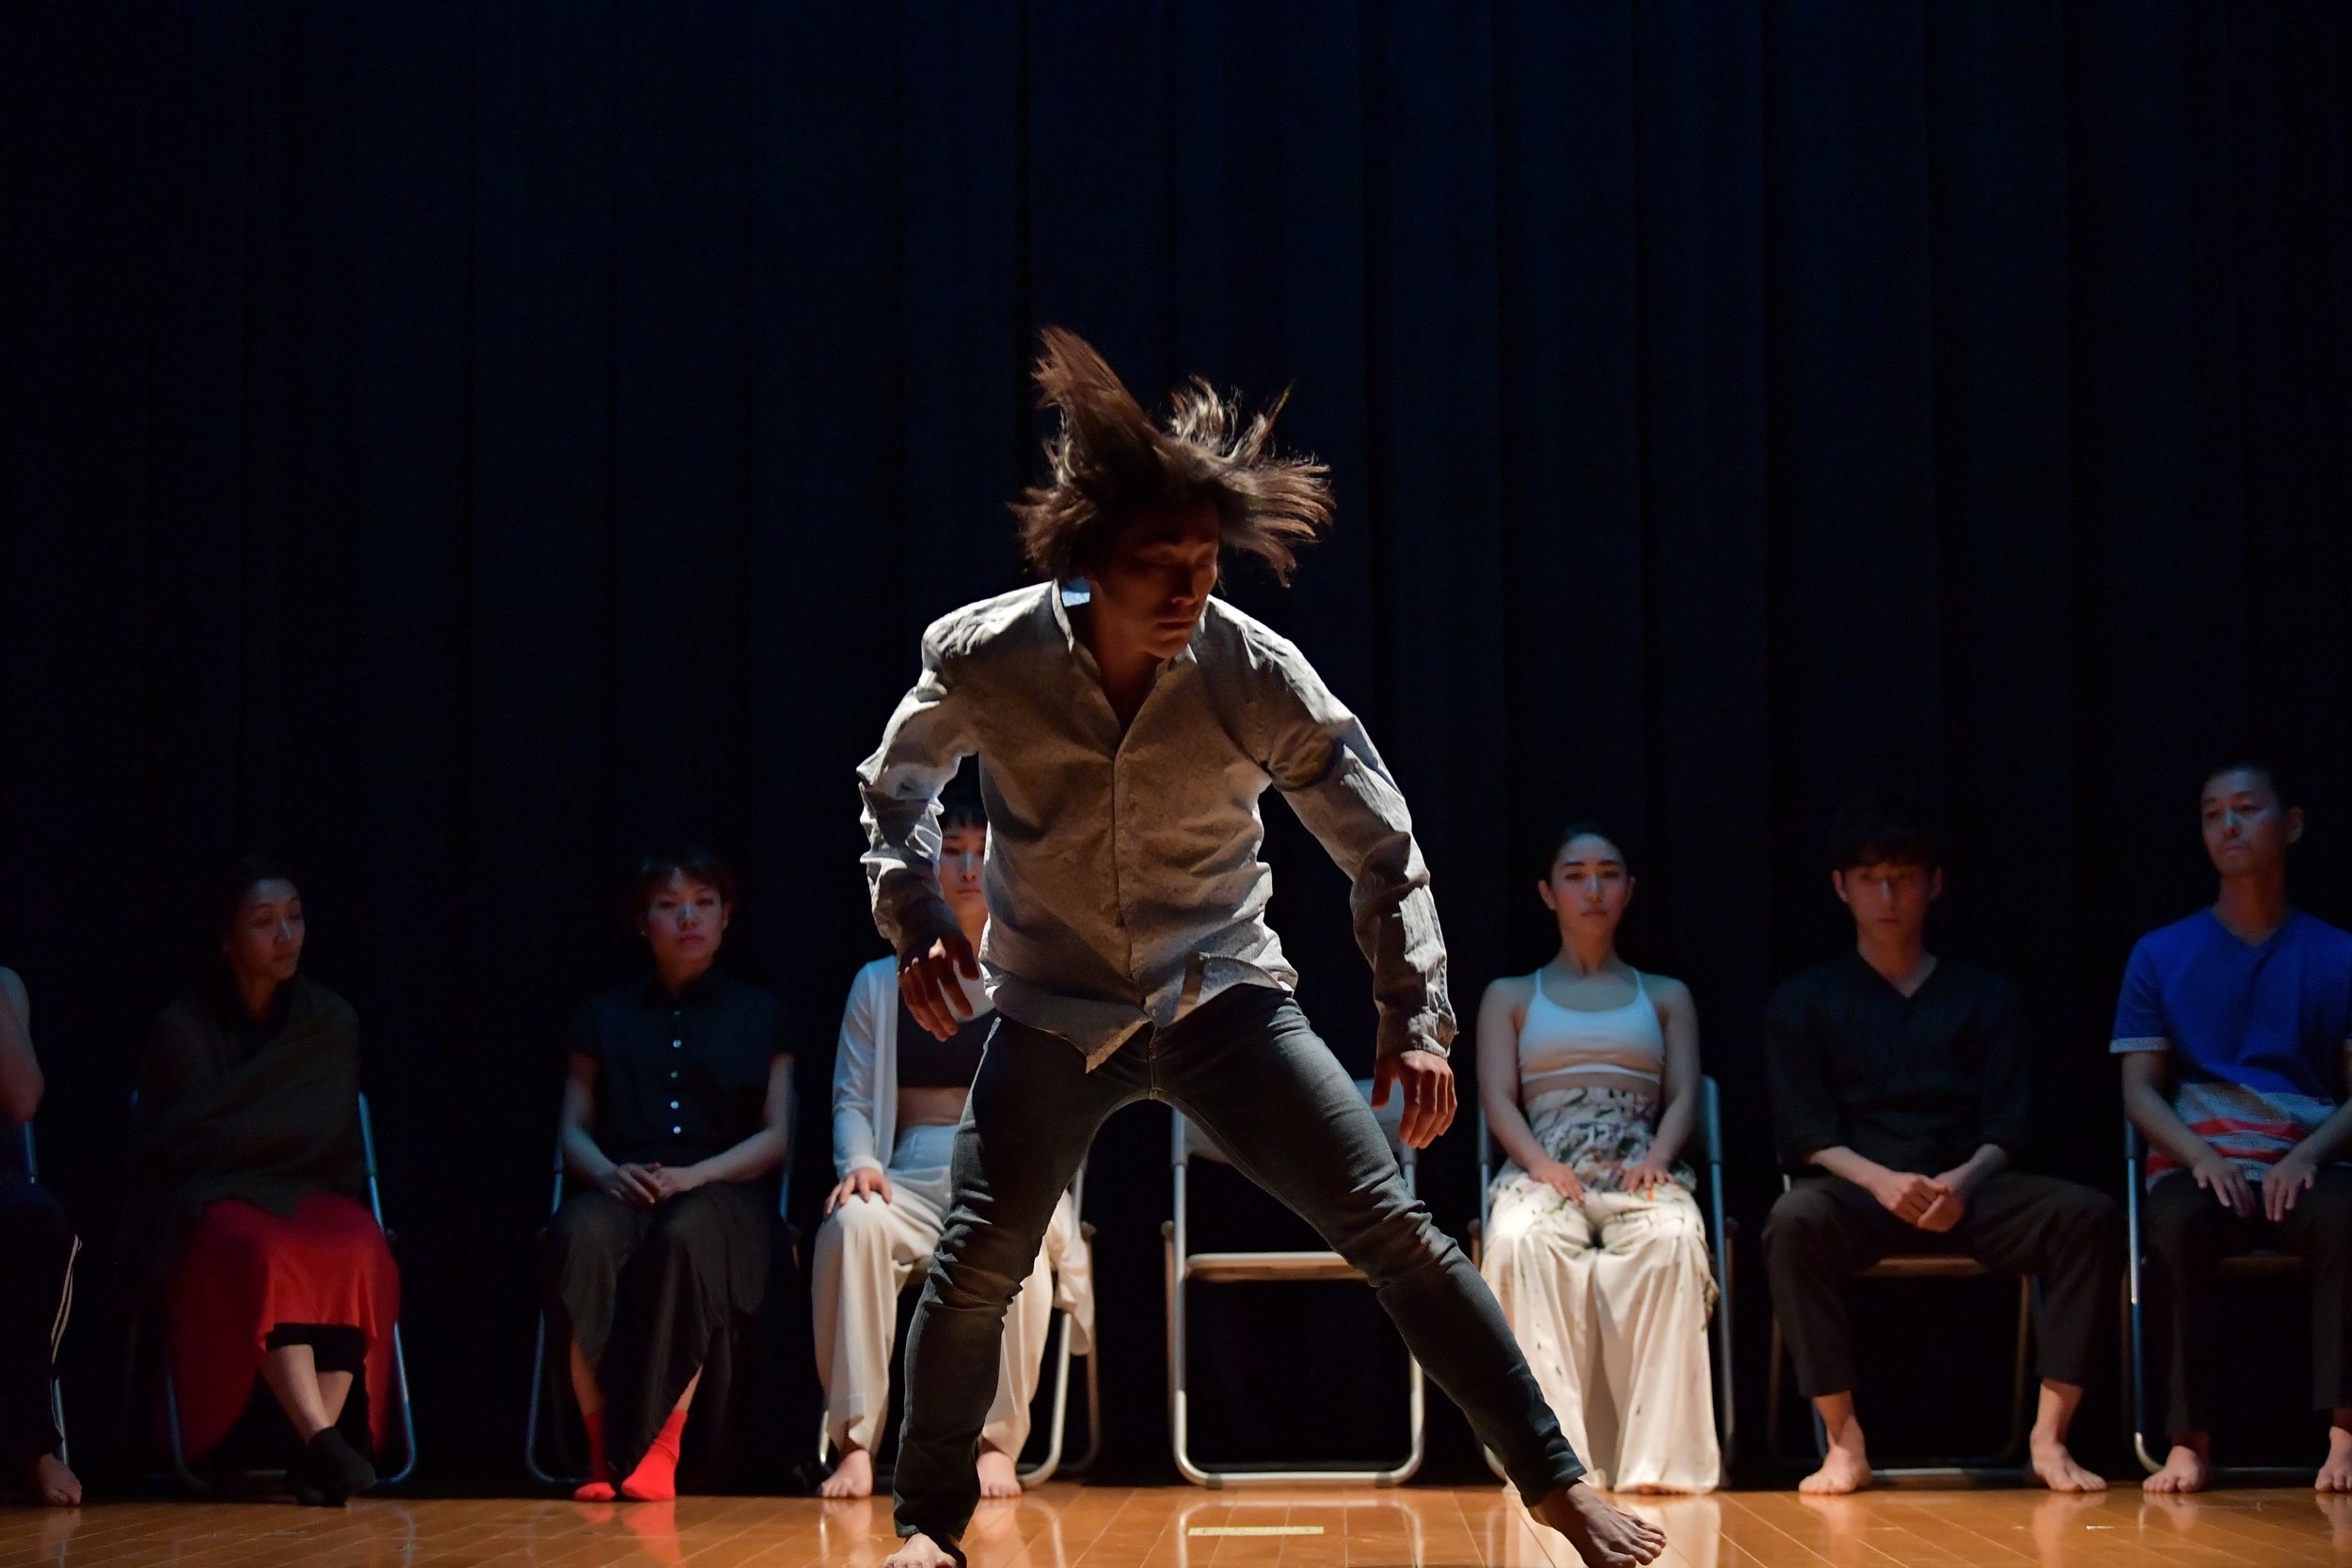 A dancer strikes a wide-legged stance, their hair flying as they move.